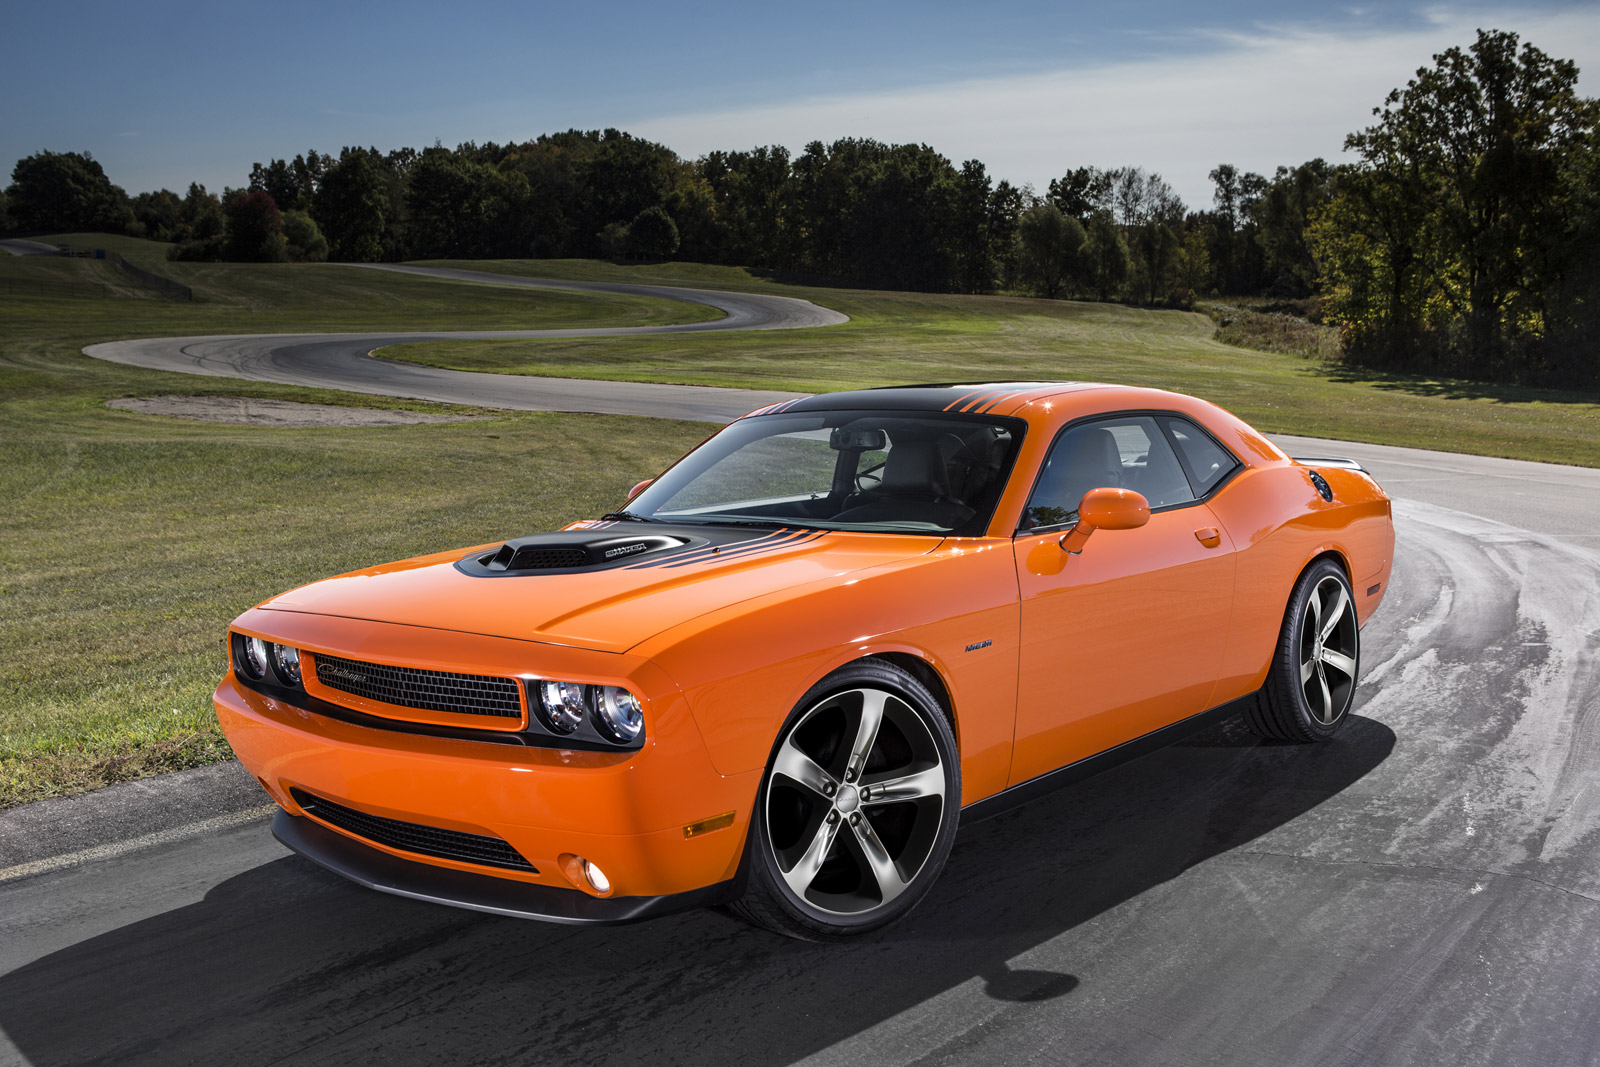 2014 Dodge Challenger prices and expert review - The Car Connection